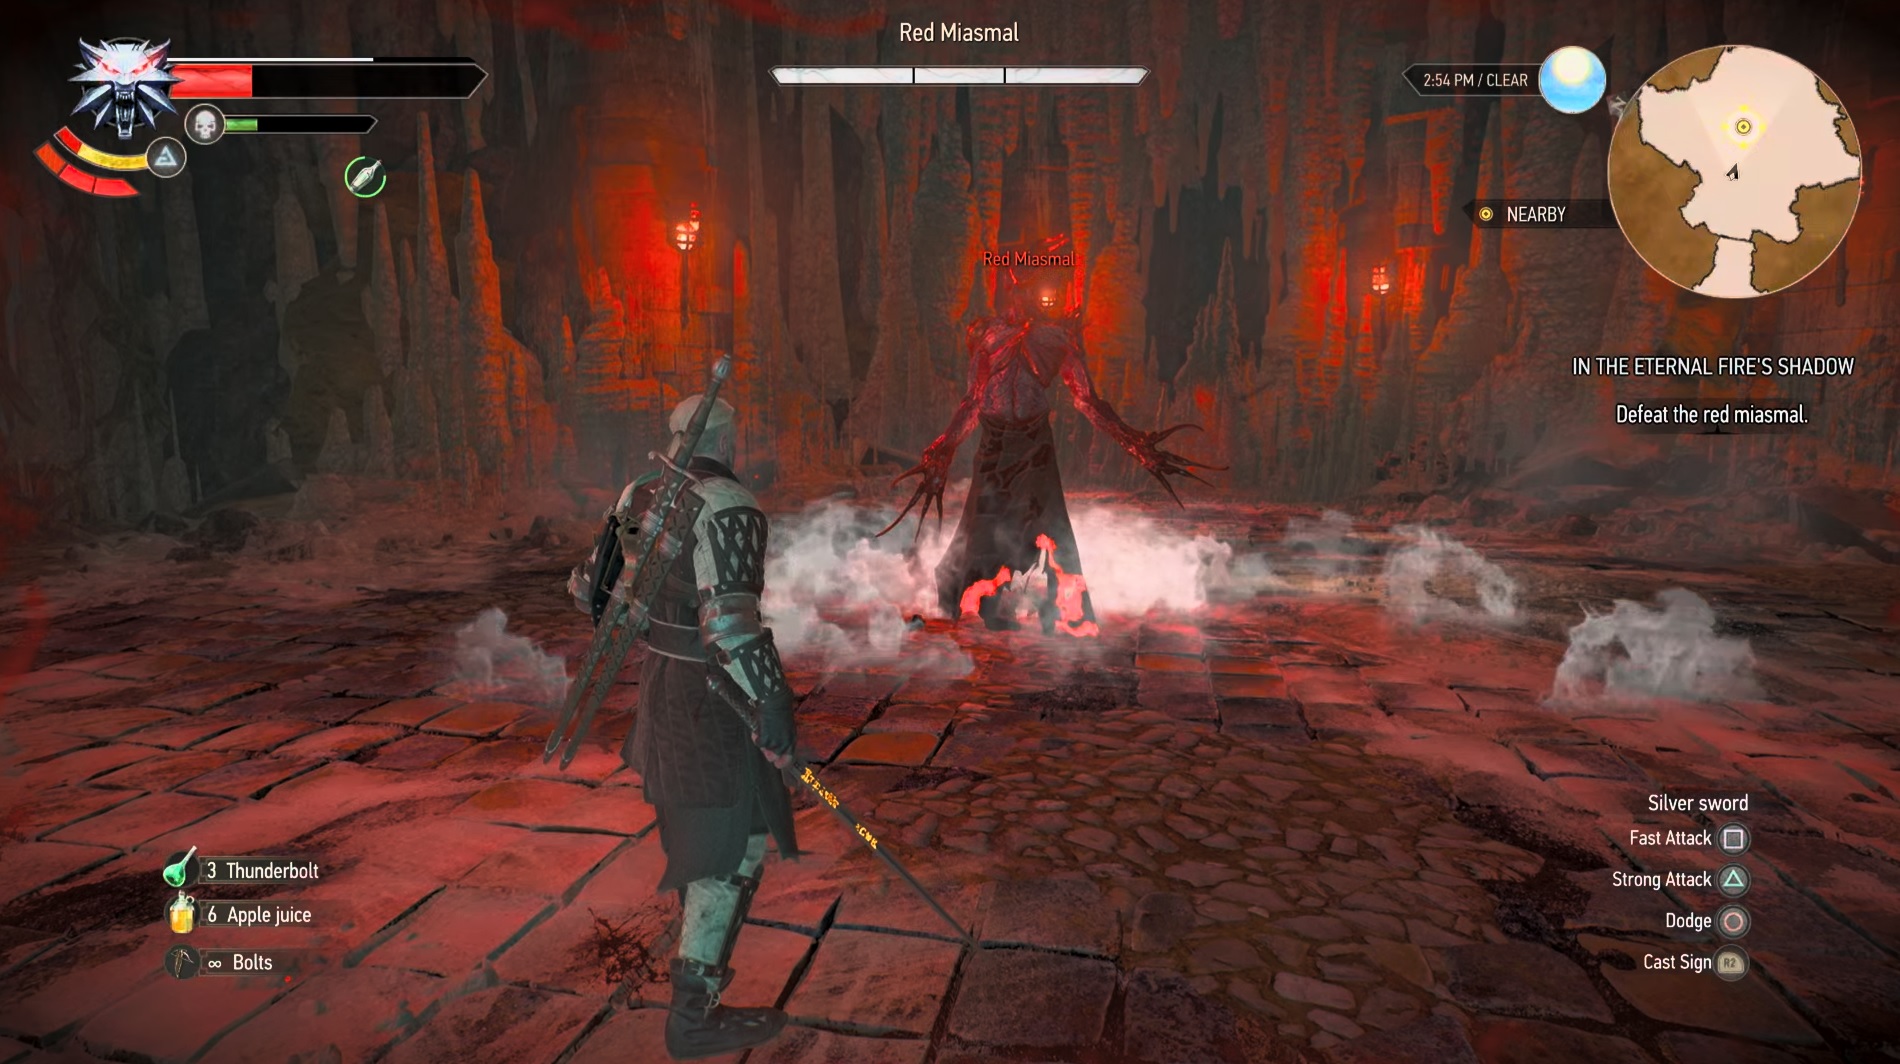 The witcher 3 reinald fight